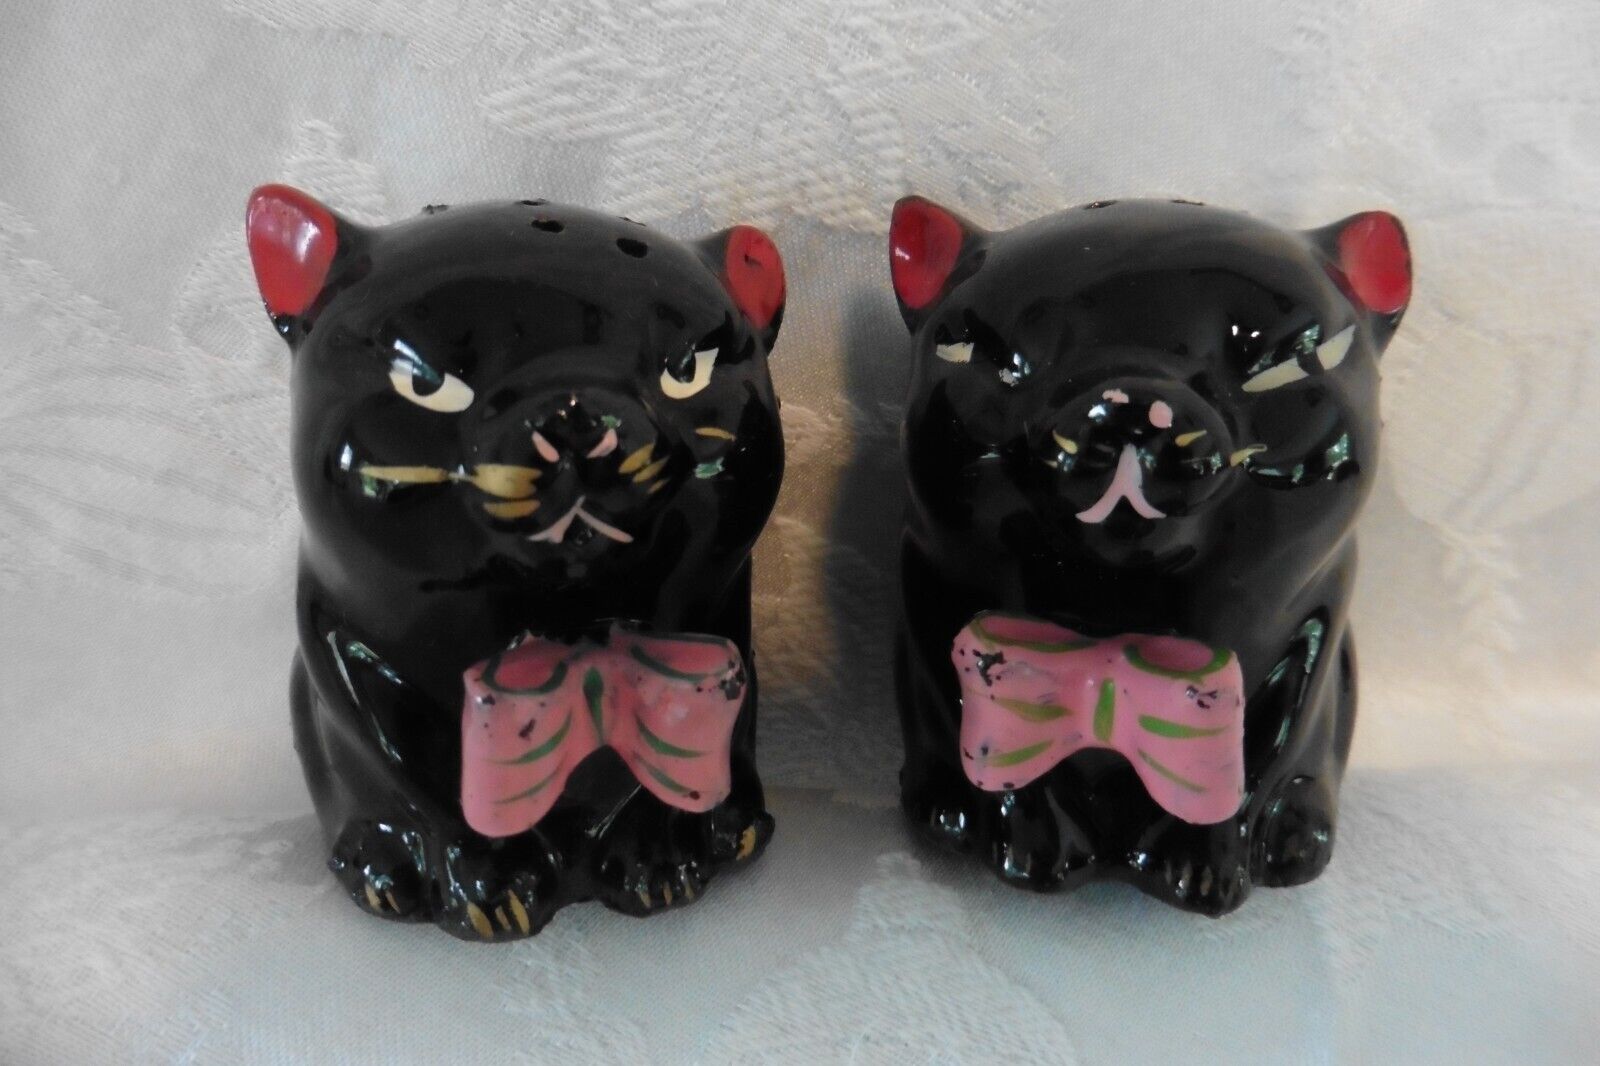 Vintage Salt and Pepper Shakers~Redware Black Cats With Pink Bows